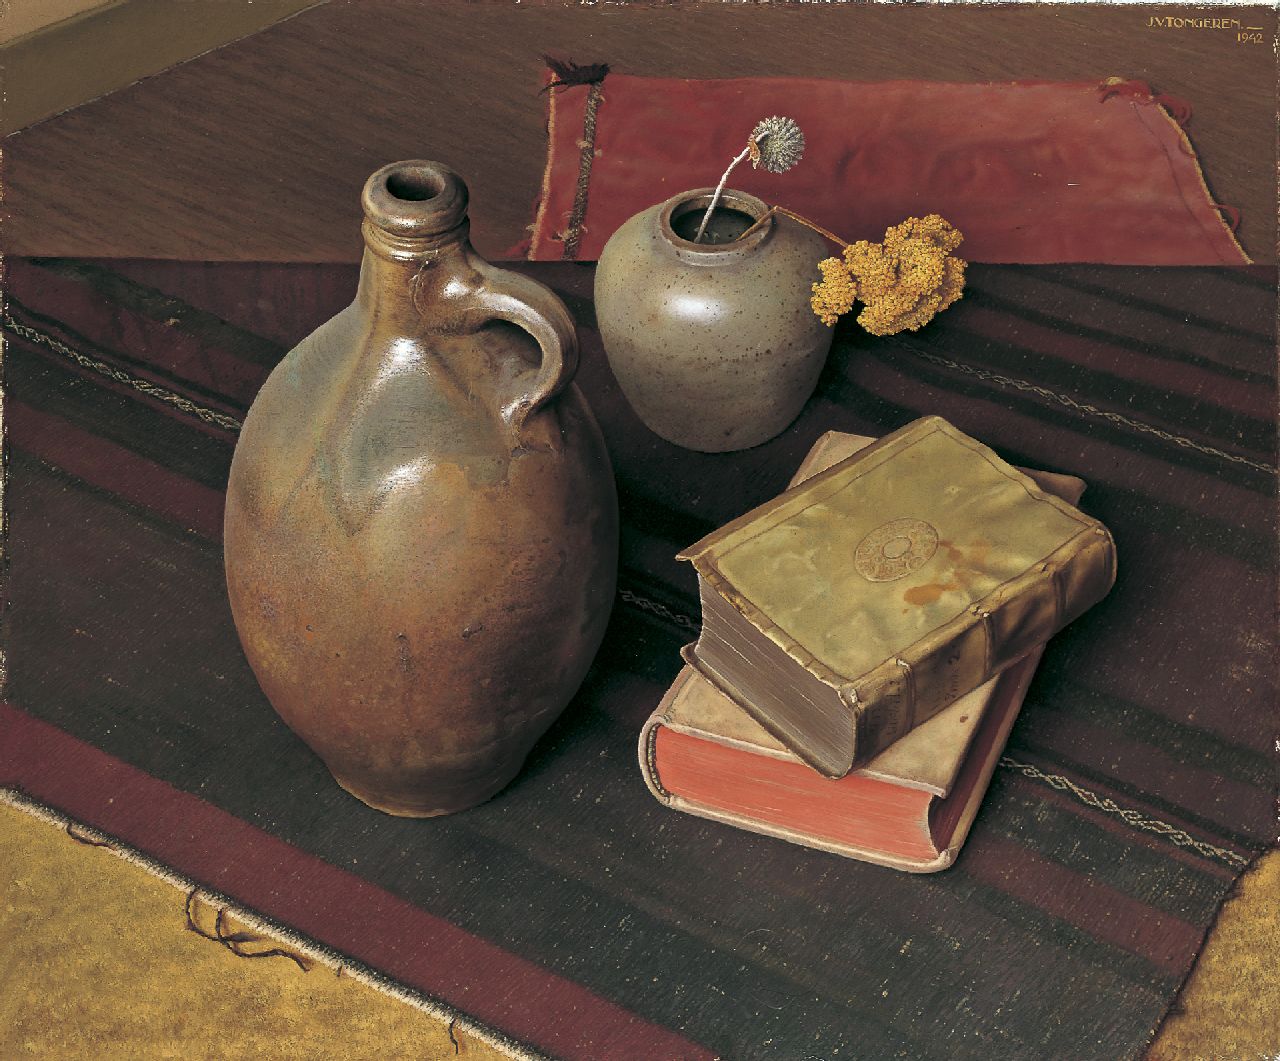 Tongeren J. van | Jan van Tongeren, A still life with books, a jug and a vase, oil on canvas 50.4 x 60.0 cm, signed u.r. and dated 1942